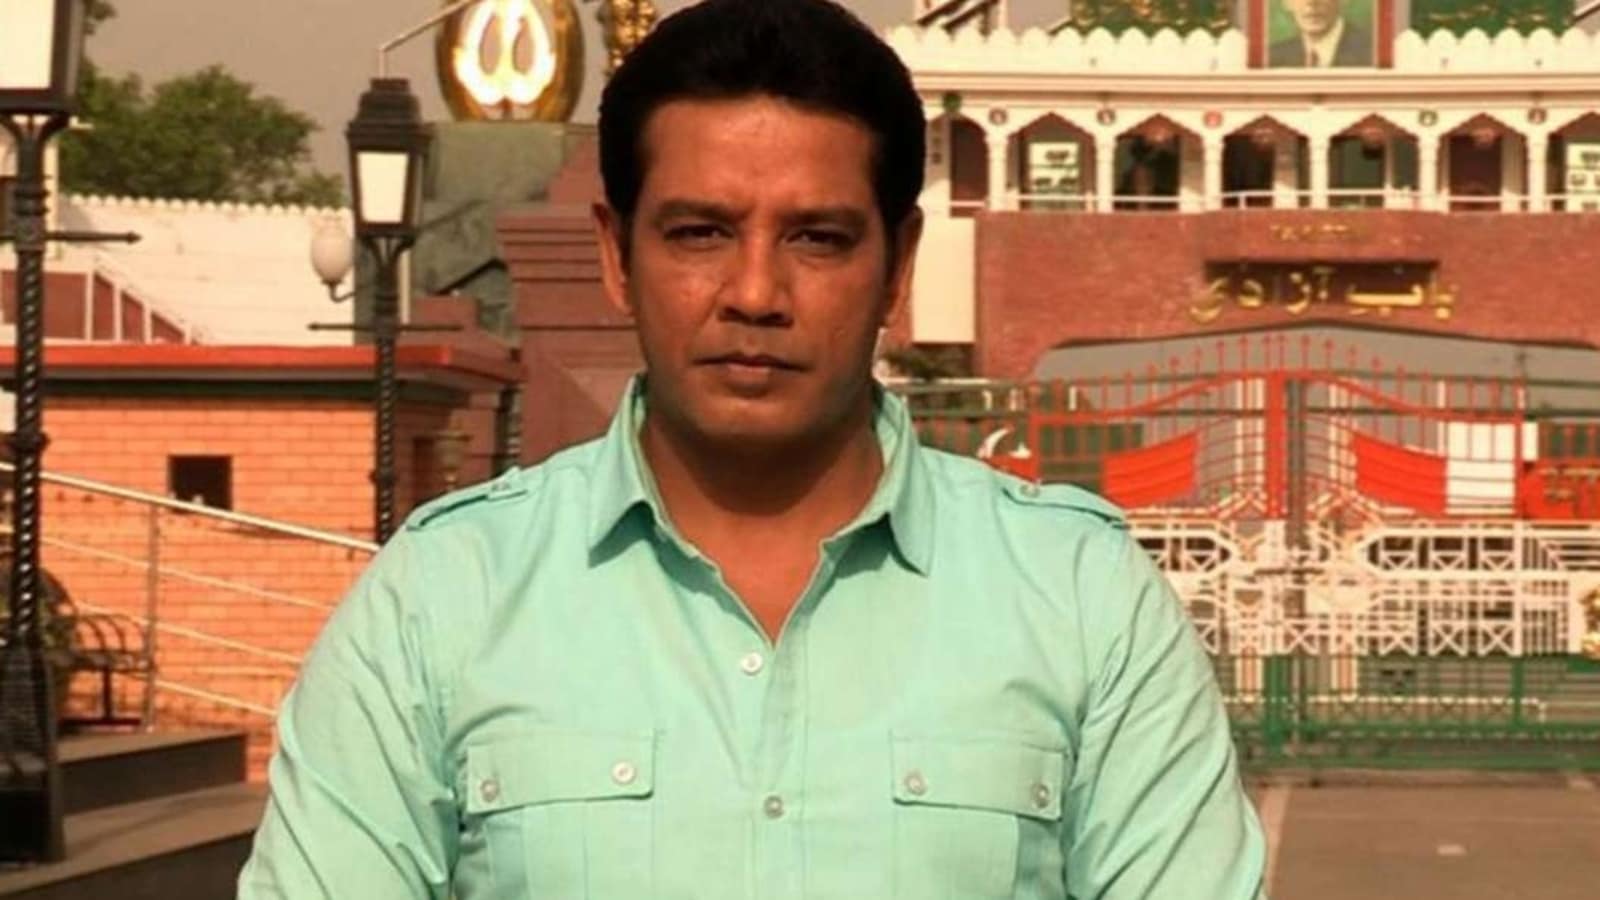 Crime Petrol Xxx Videos - Anup Soni says after Crime Patrol, people feel he can help them with police  work - Hindustan Times